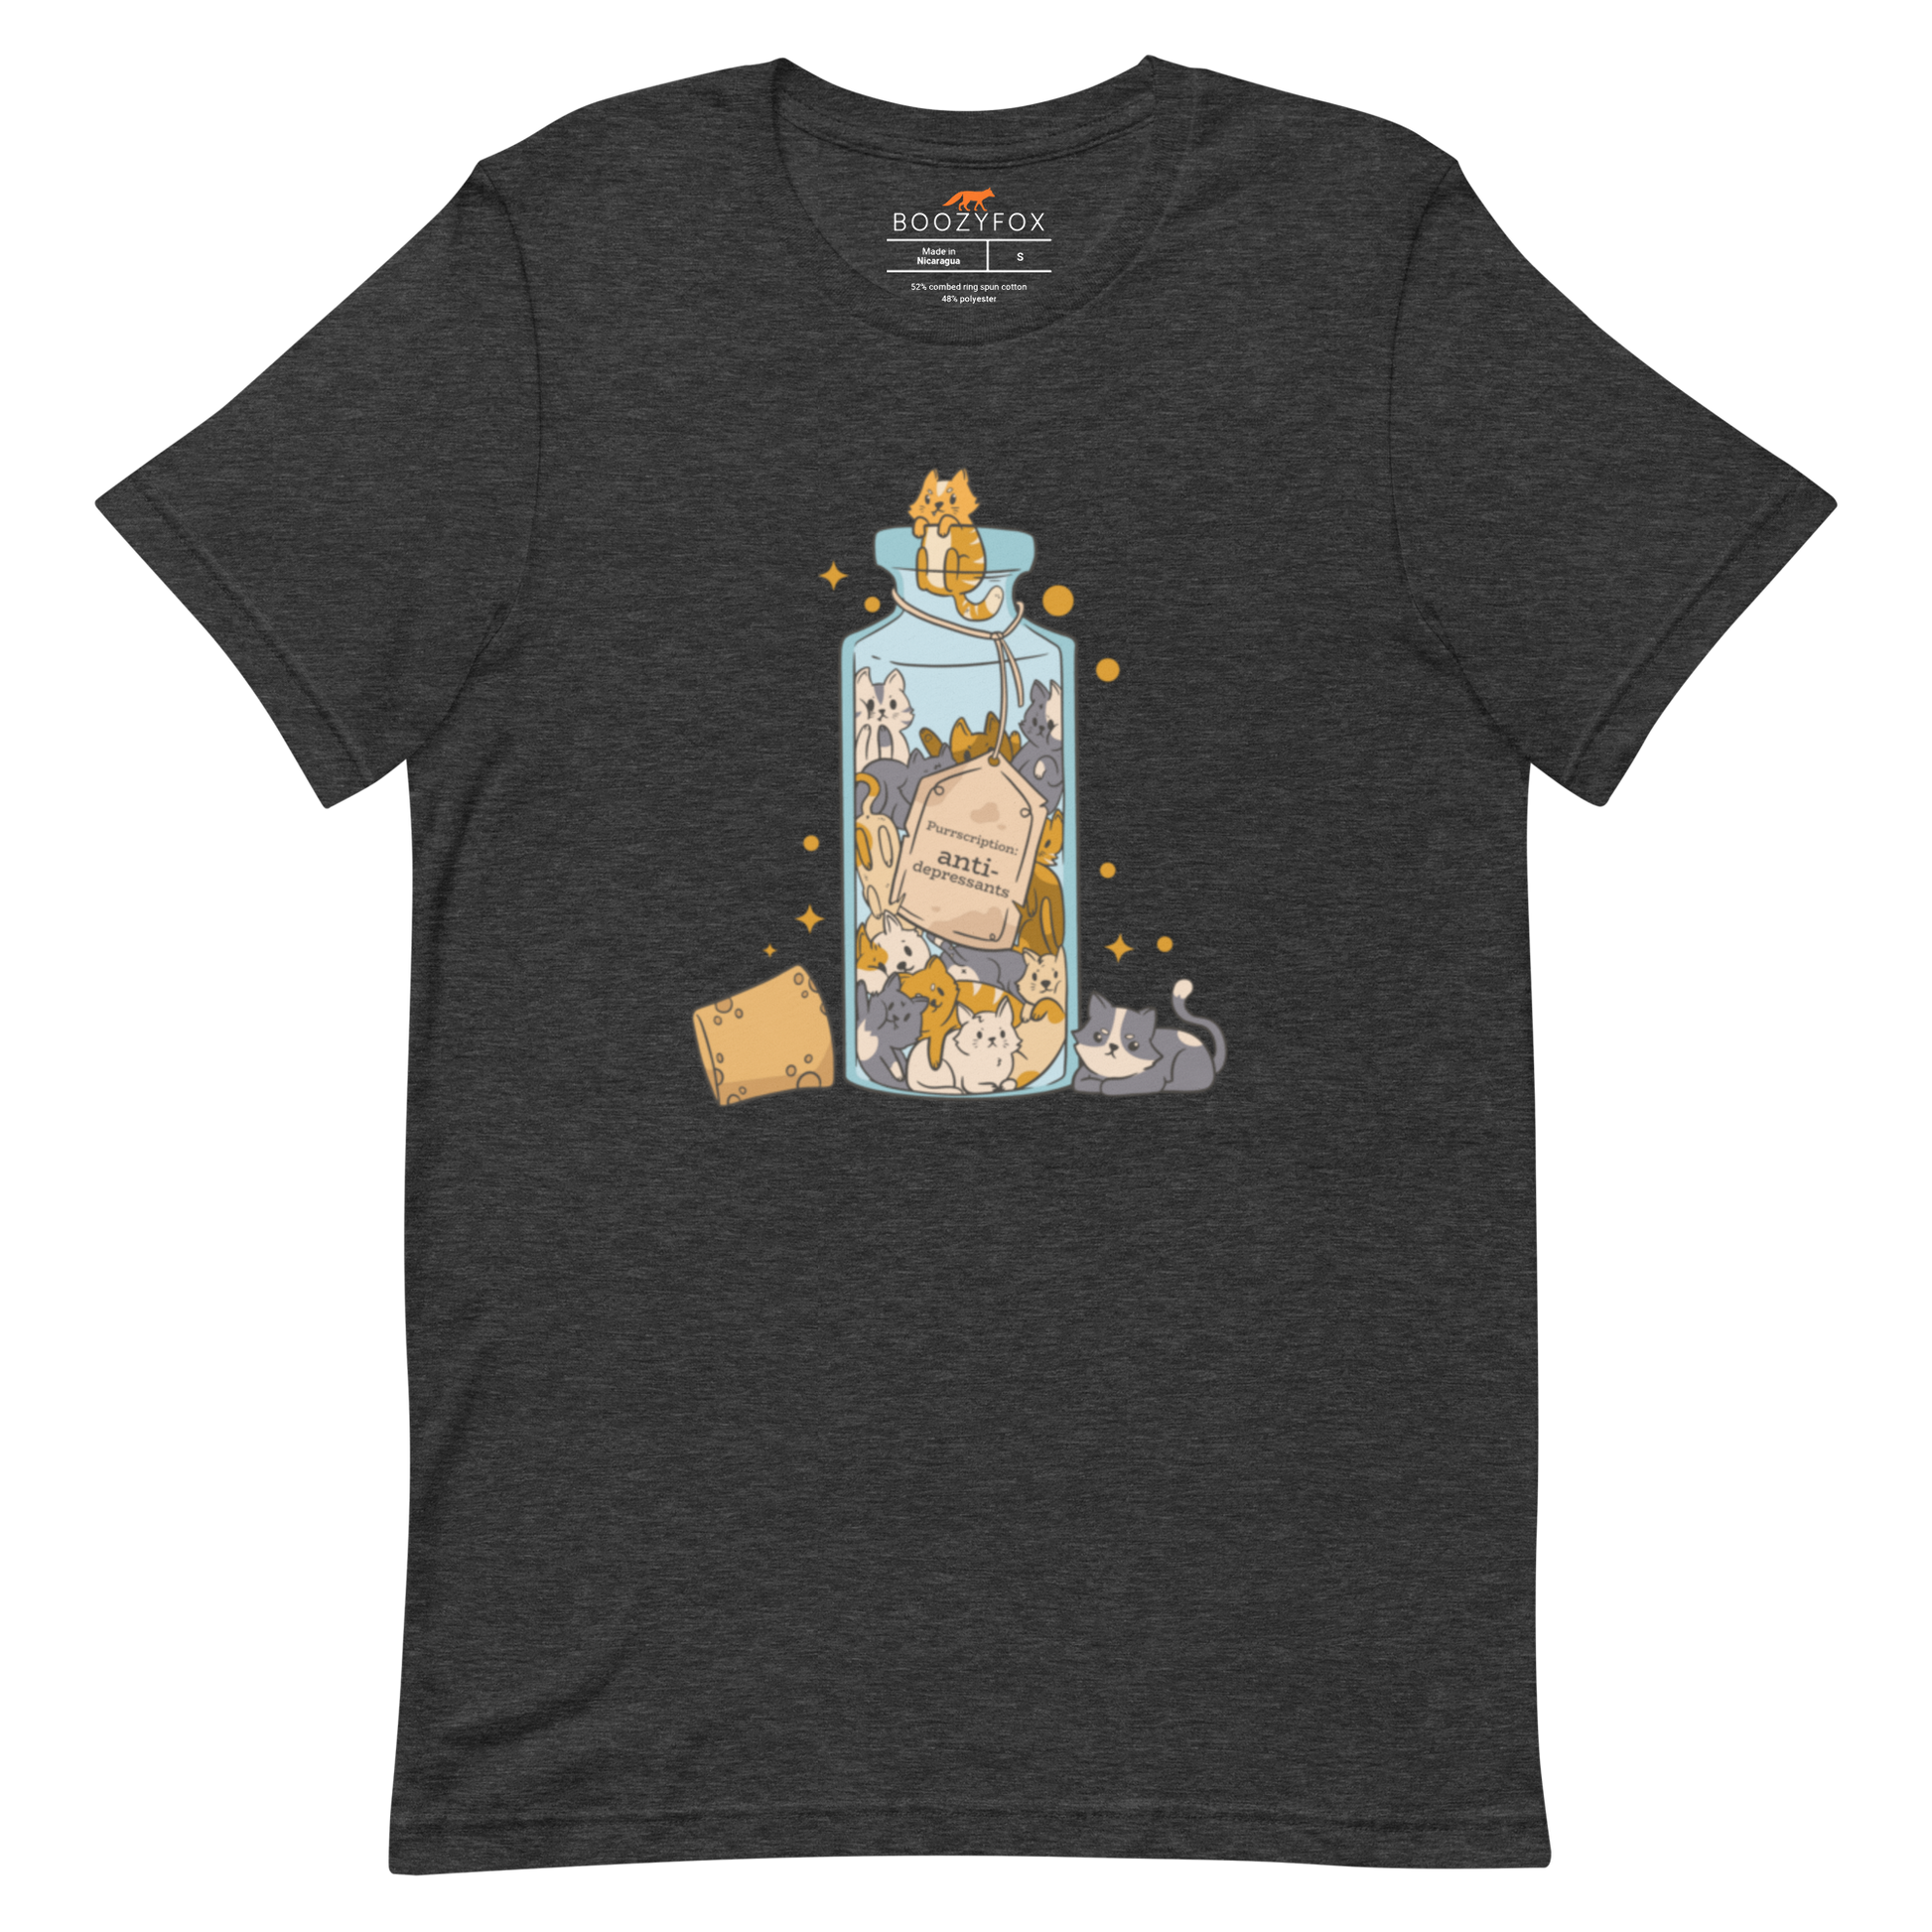 Dark Grey Heather Premium Cat T-Shirt featuring a funny Anti-Depressants graphic on the chest - Cute Graphic Cat Tees - Boozy Fox